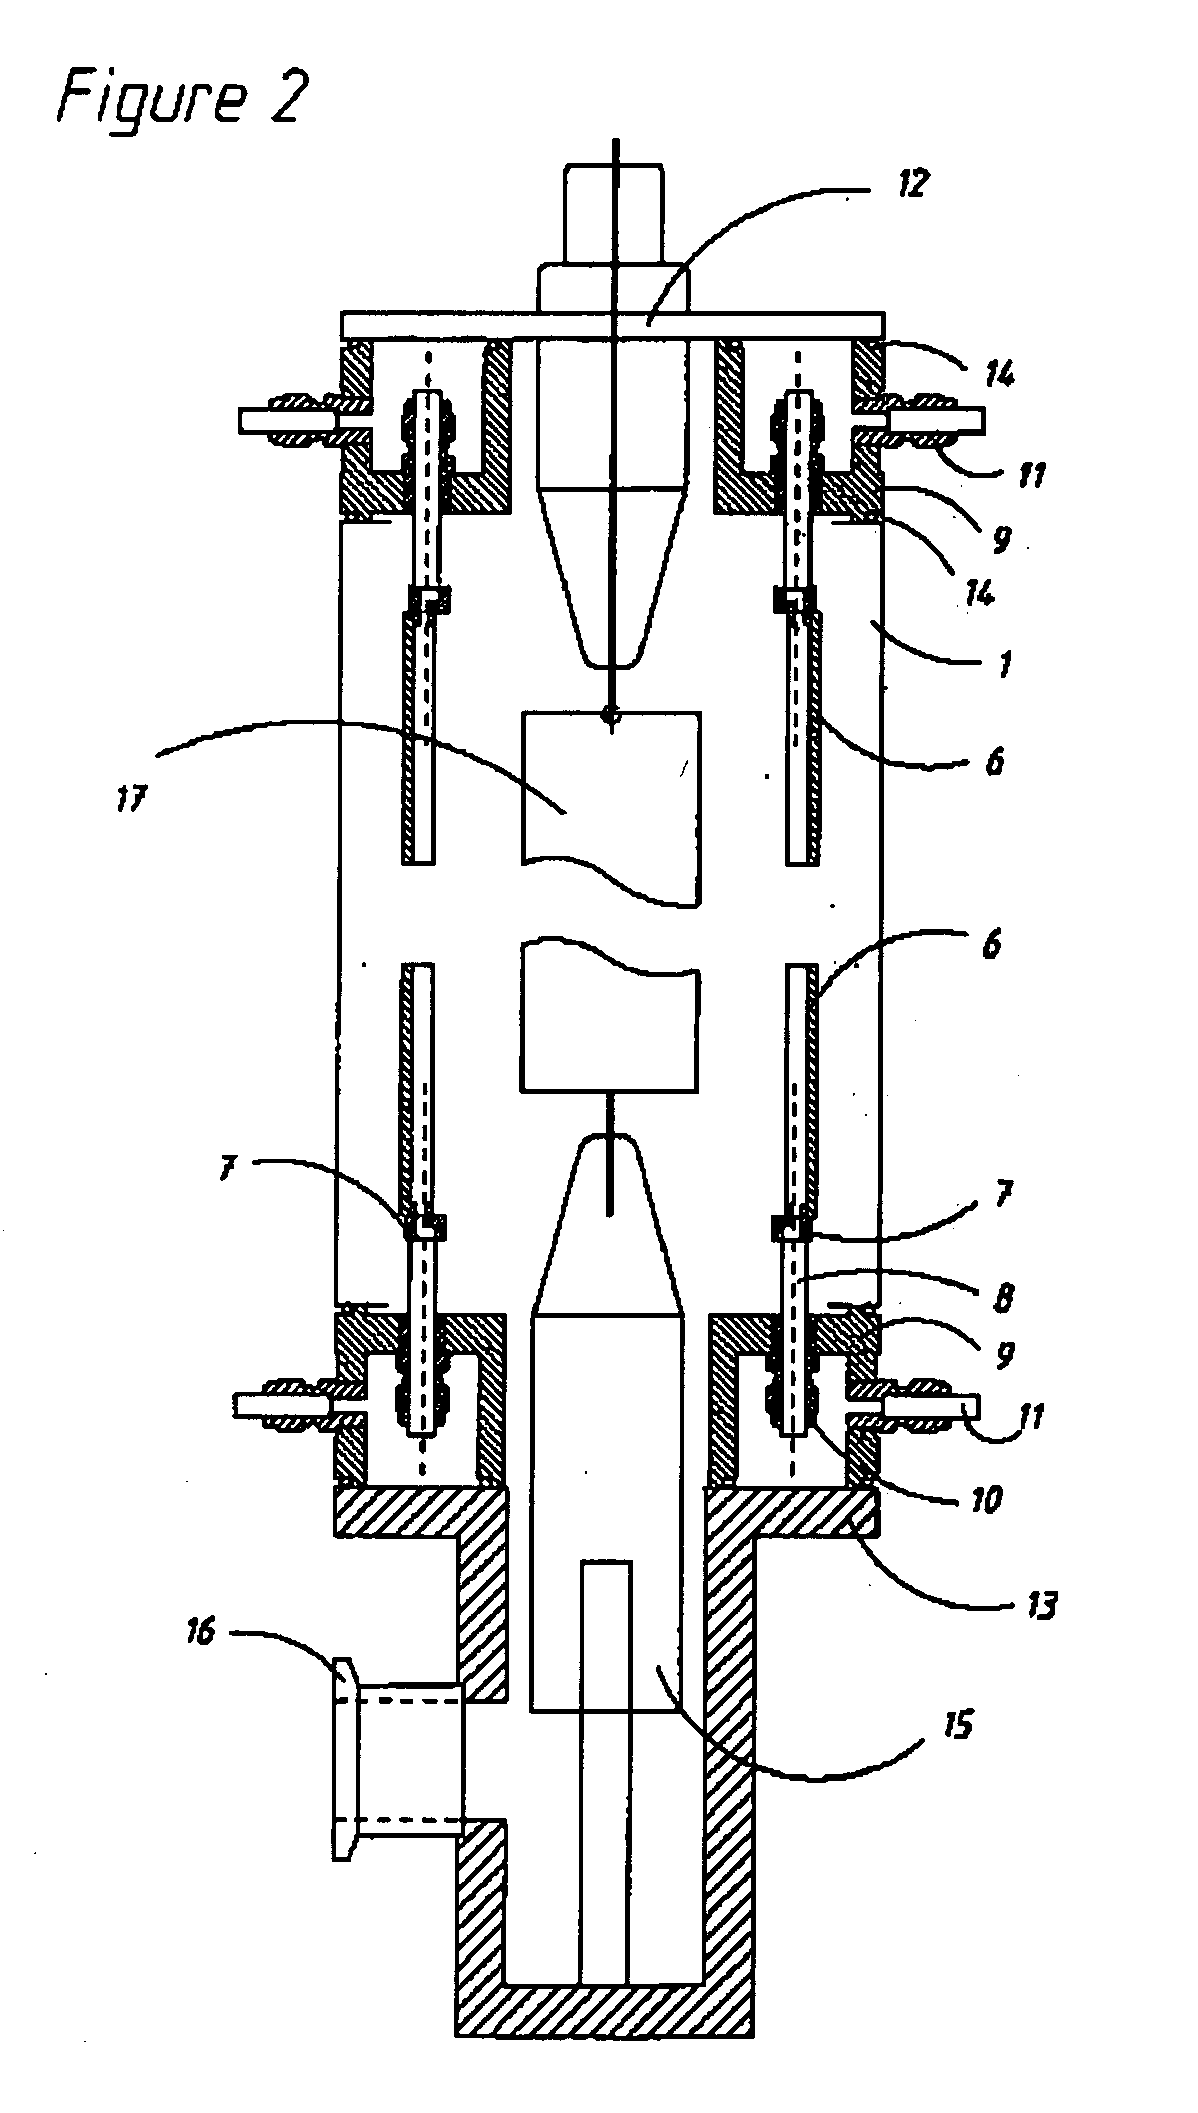 Proton Generator Apparatus for Isotope Production